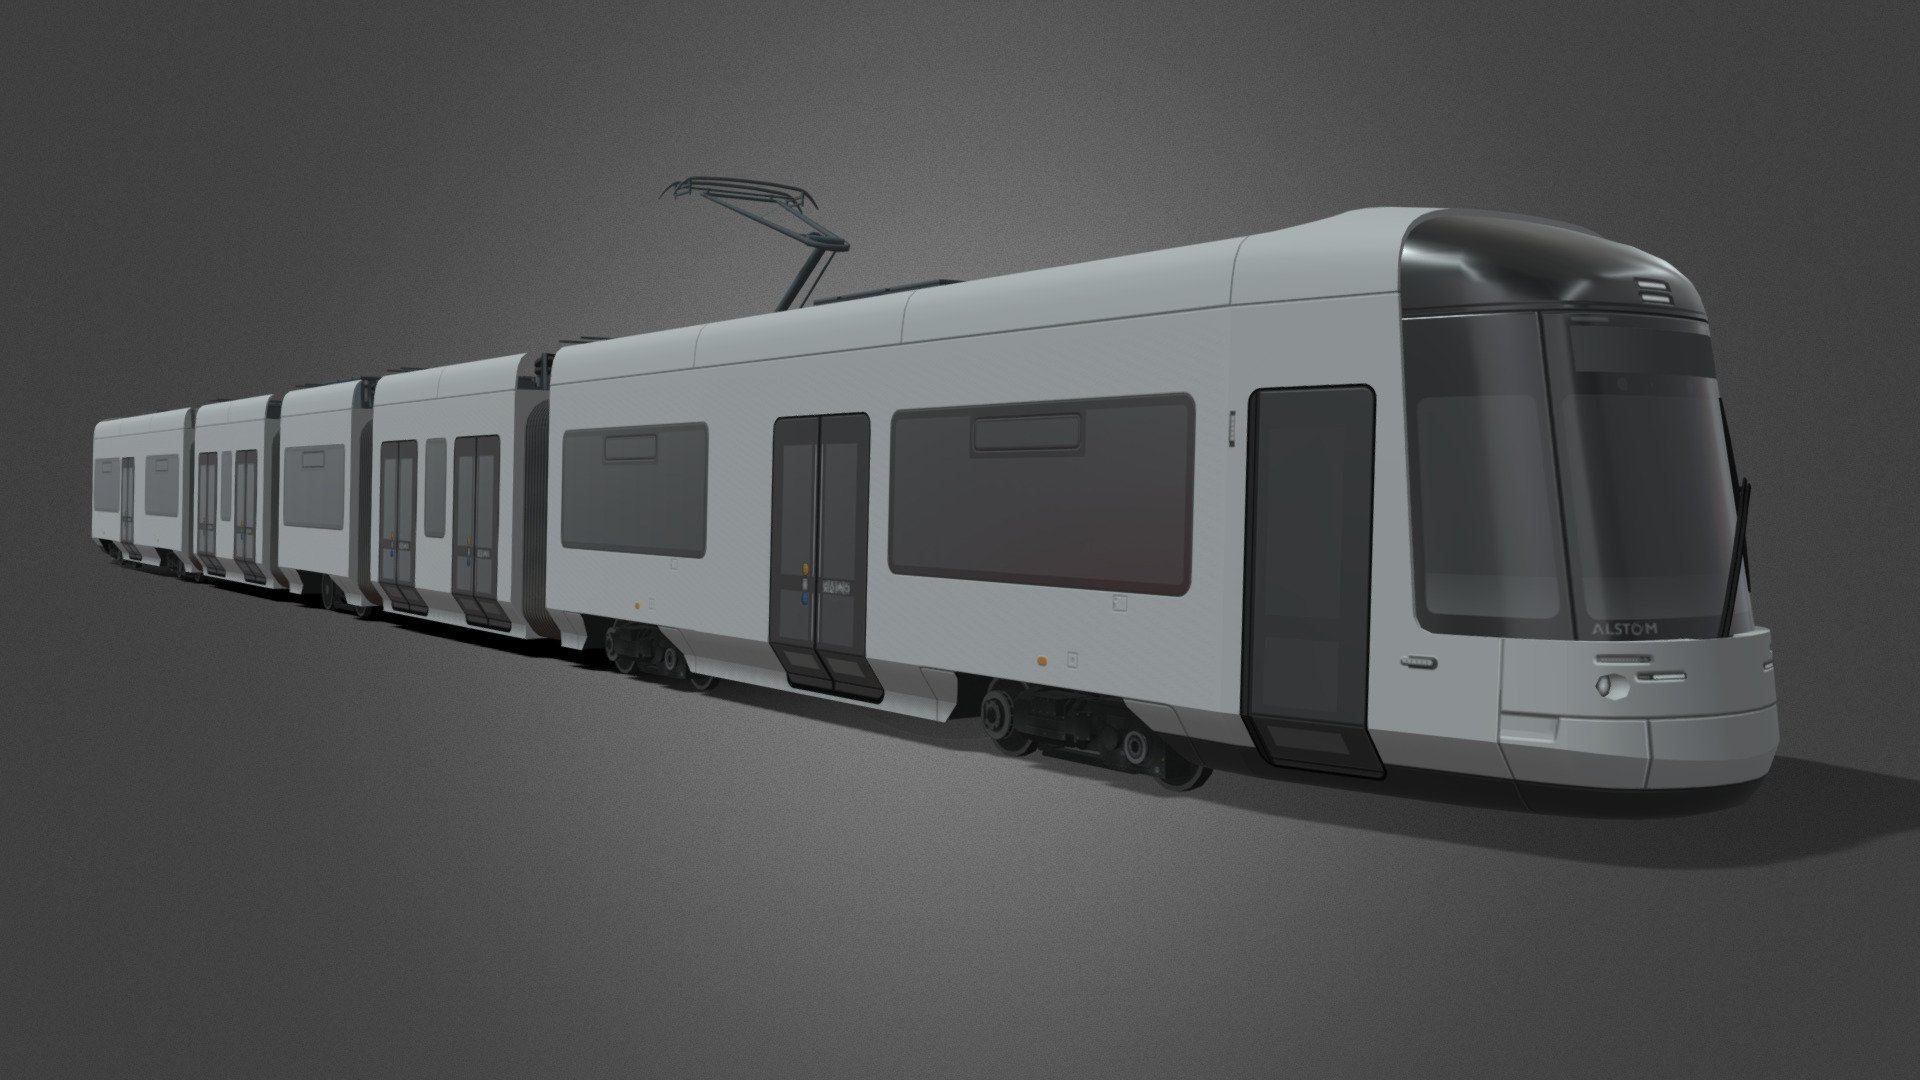 The Alstom NGT DXDD tram is a modern low-floor tram based manufactured for the city of Dresden, Germany. The trams were first manufactured in 2021, with the first unit entering service in June 2022.

This model was originally made as an asset for the game Cities: Skylines. There are simplifications to the texture and model to keep it optimised for the game.

Available formats: Blender (.blend), Wavefront OBJ (.obj), Autodesk FBX (.fbx), STL (.stl)

Polygon count: 10,797 Vertex count: 16,314

Model made in Blender 3.0 - Dresden NGT DXDD Tram - Buy Royalty Free 3D model by Nostrix 3d model